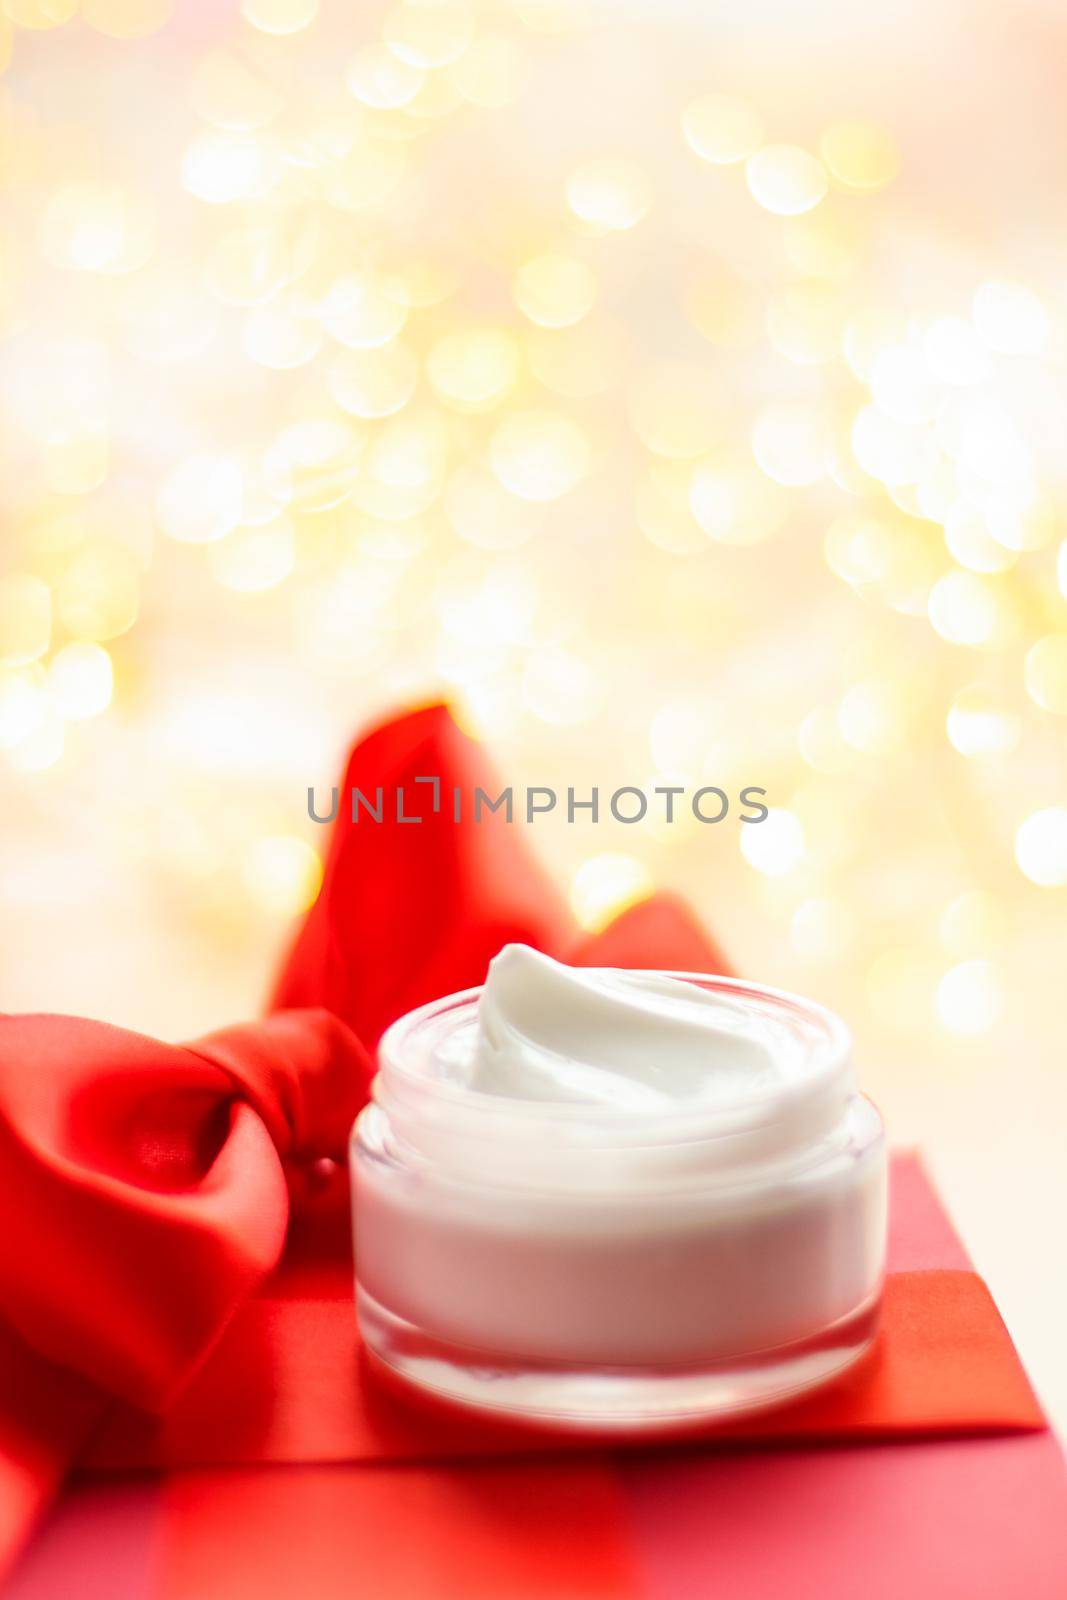 Beauty, cosmetics and skincare concept - Luxury face cream as a holiday gift